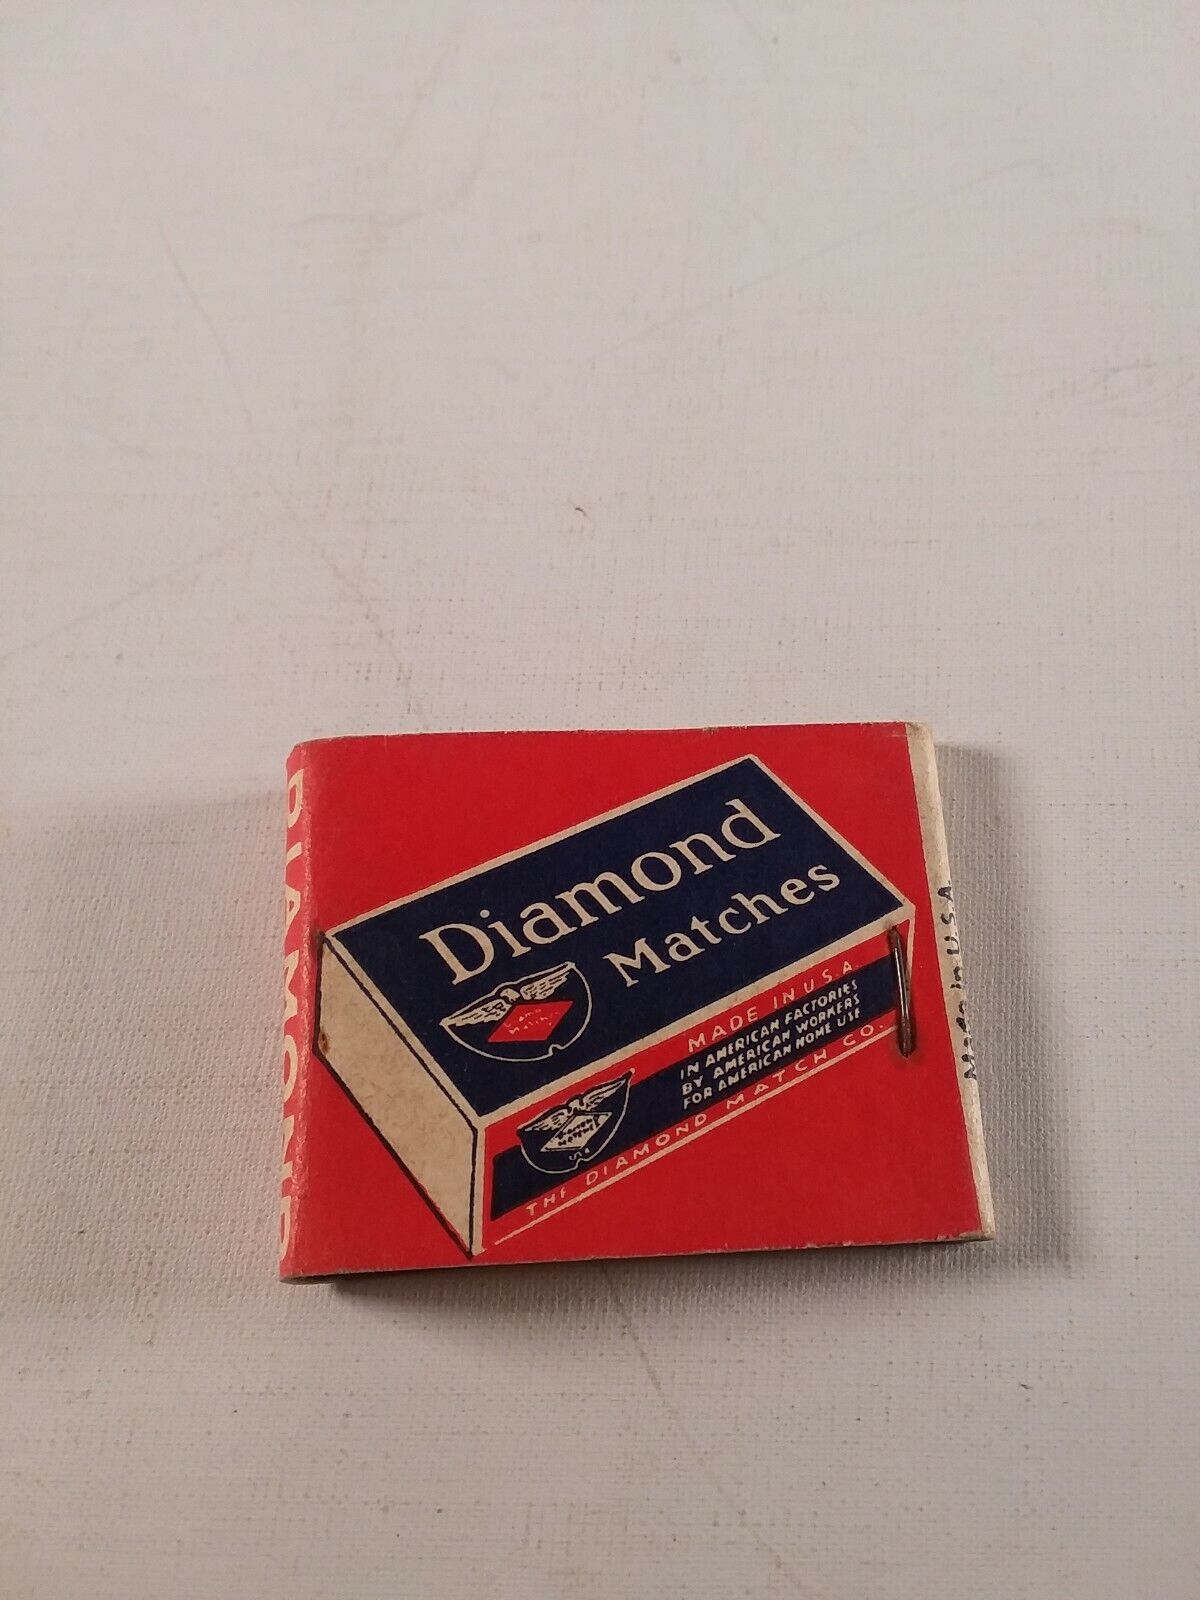 Vtg diamond matches matchbook made in the u.s.a